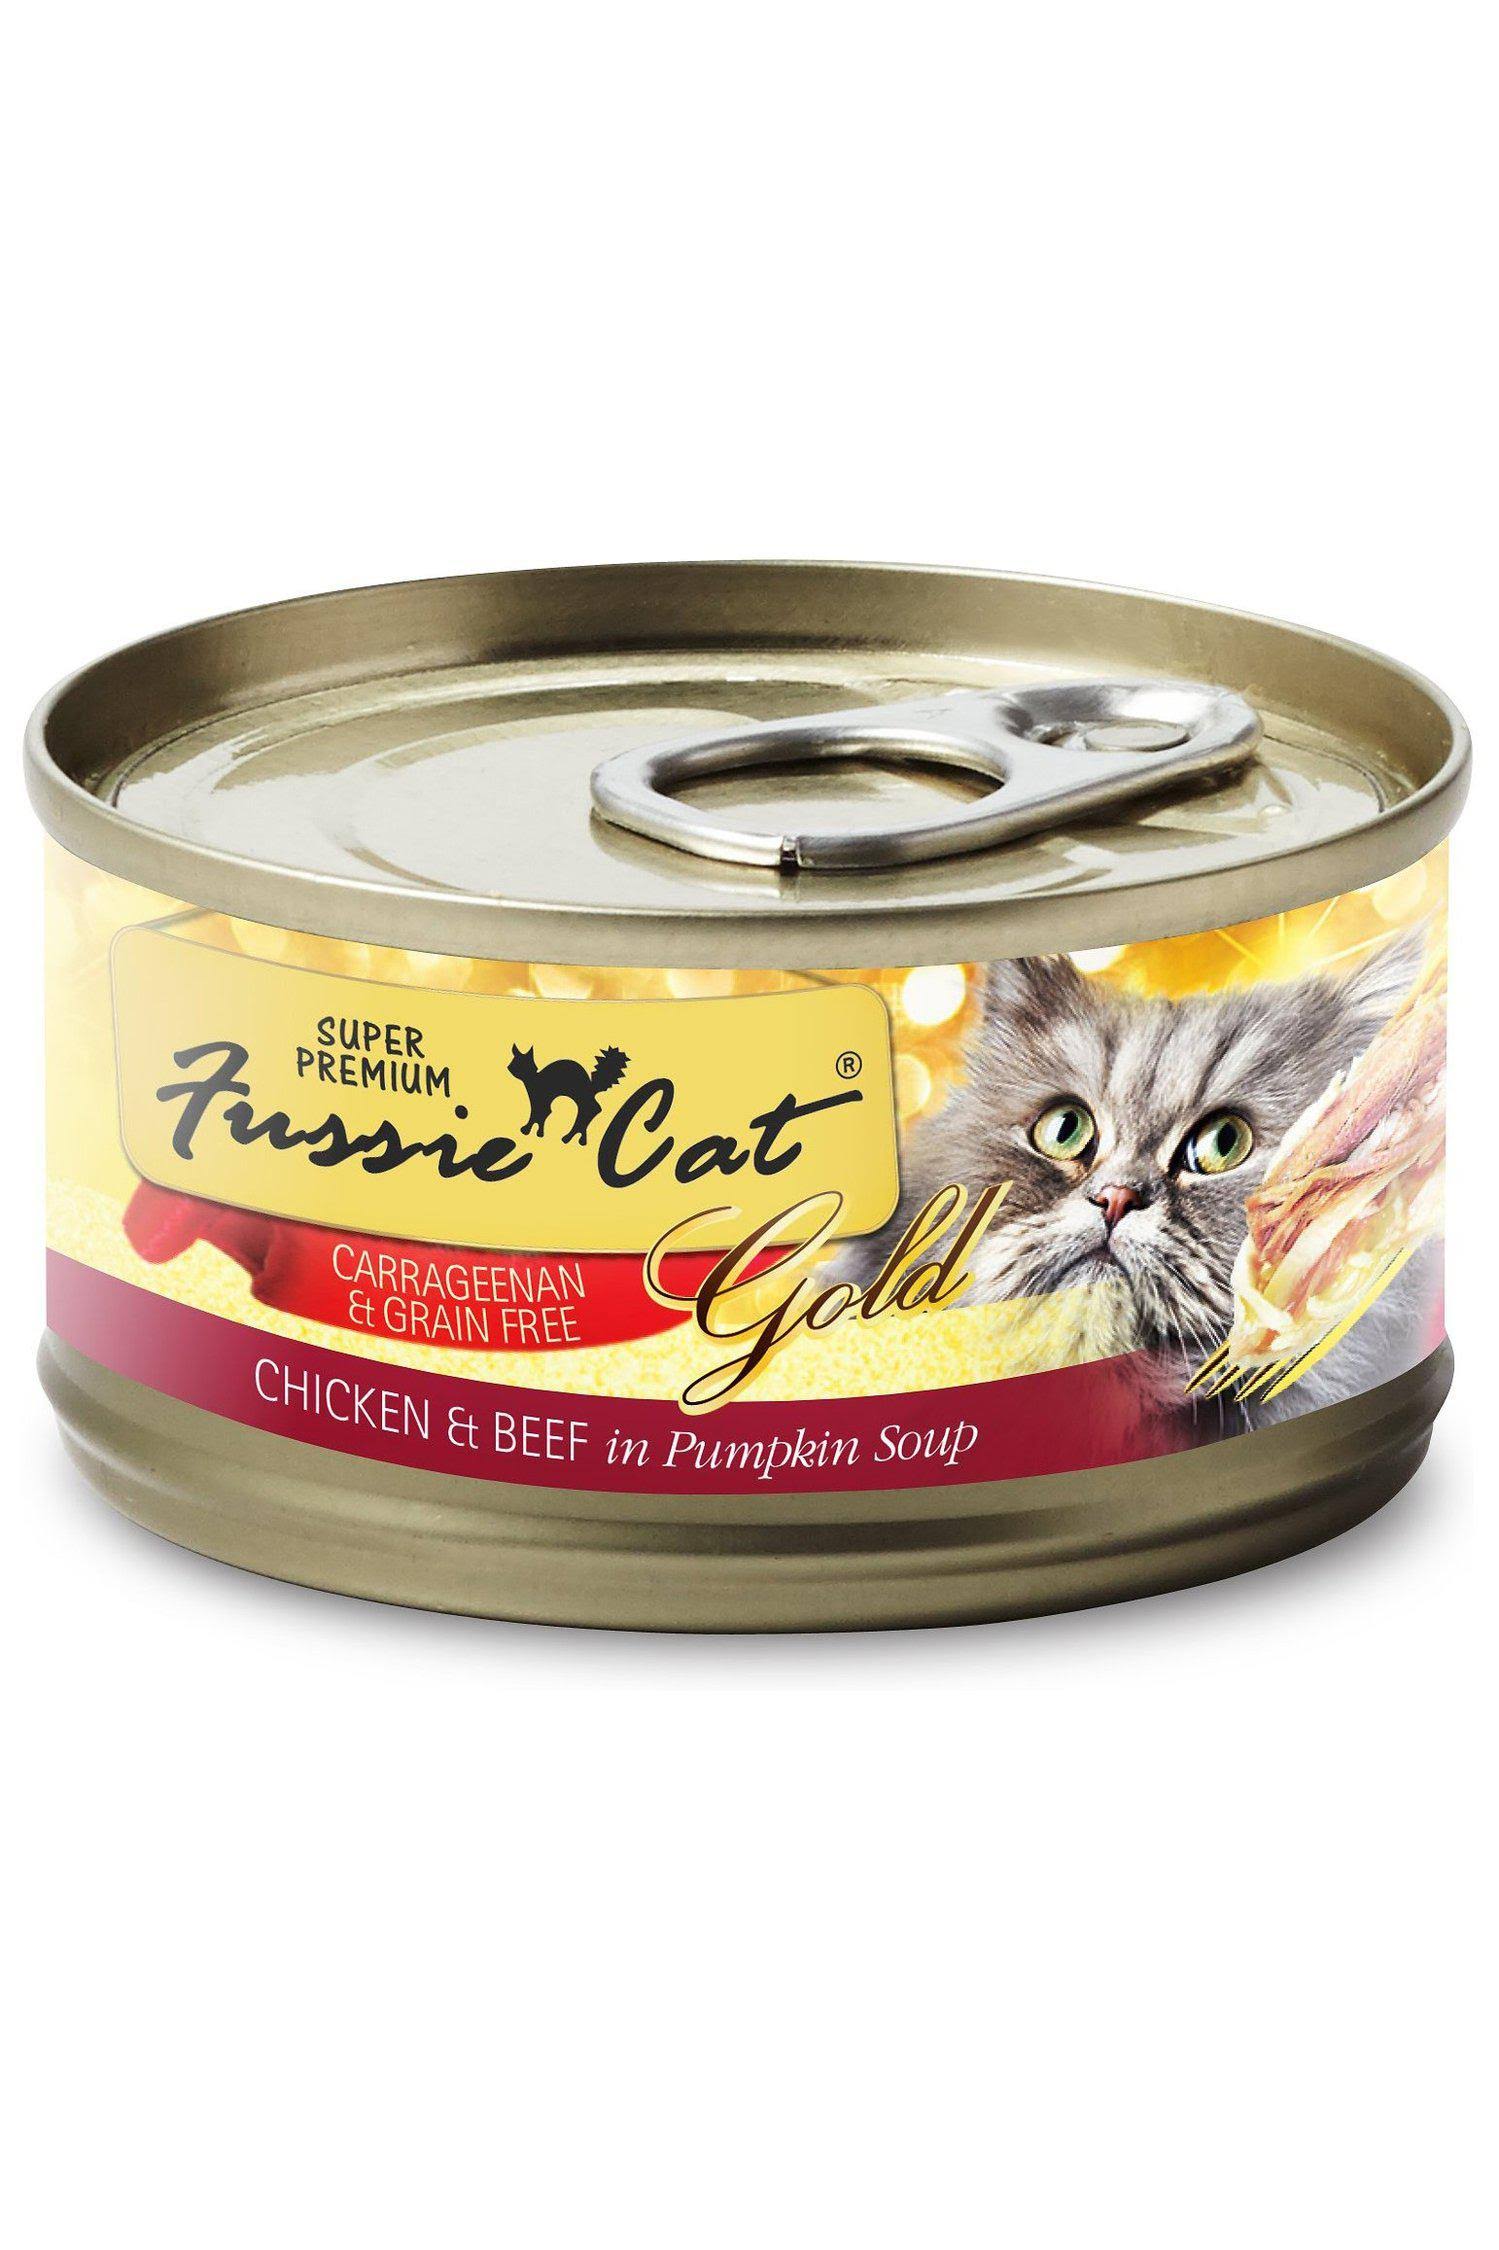 Fussie Cat Super Premium Grain Free Chicken and Beef in Pumpkin Soup Canned Cat Food 2.82-oz, Case of 24